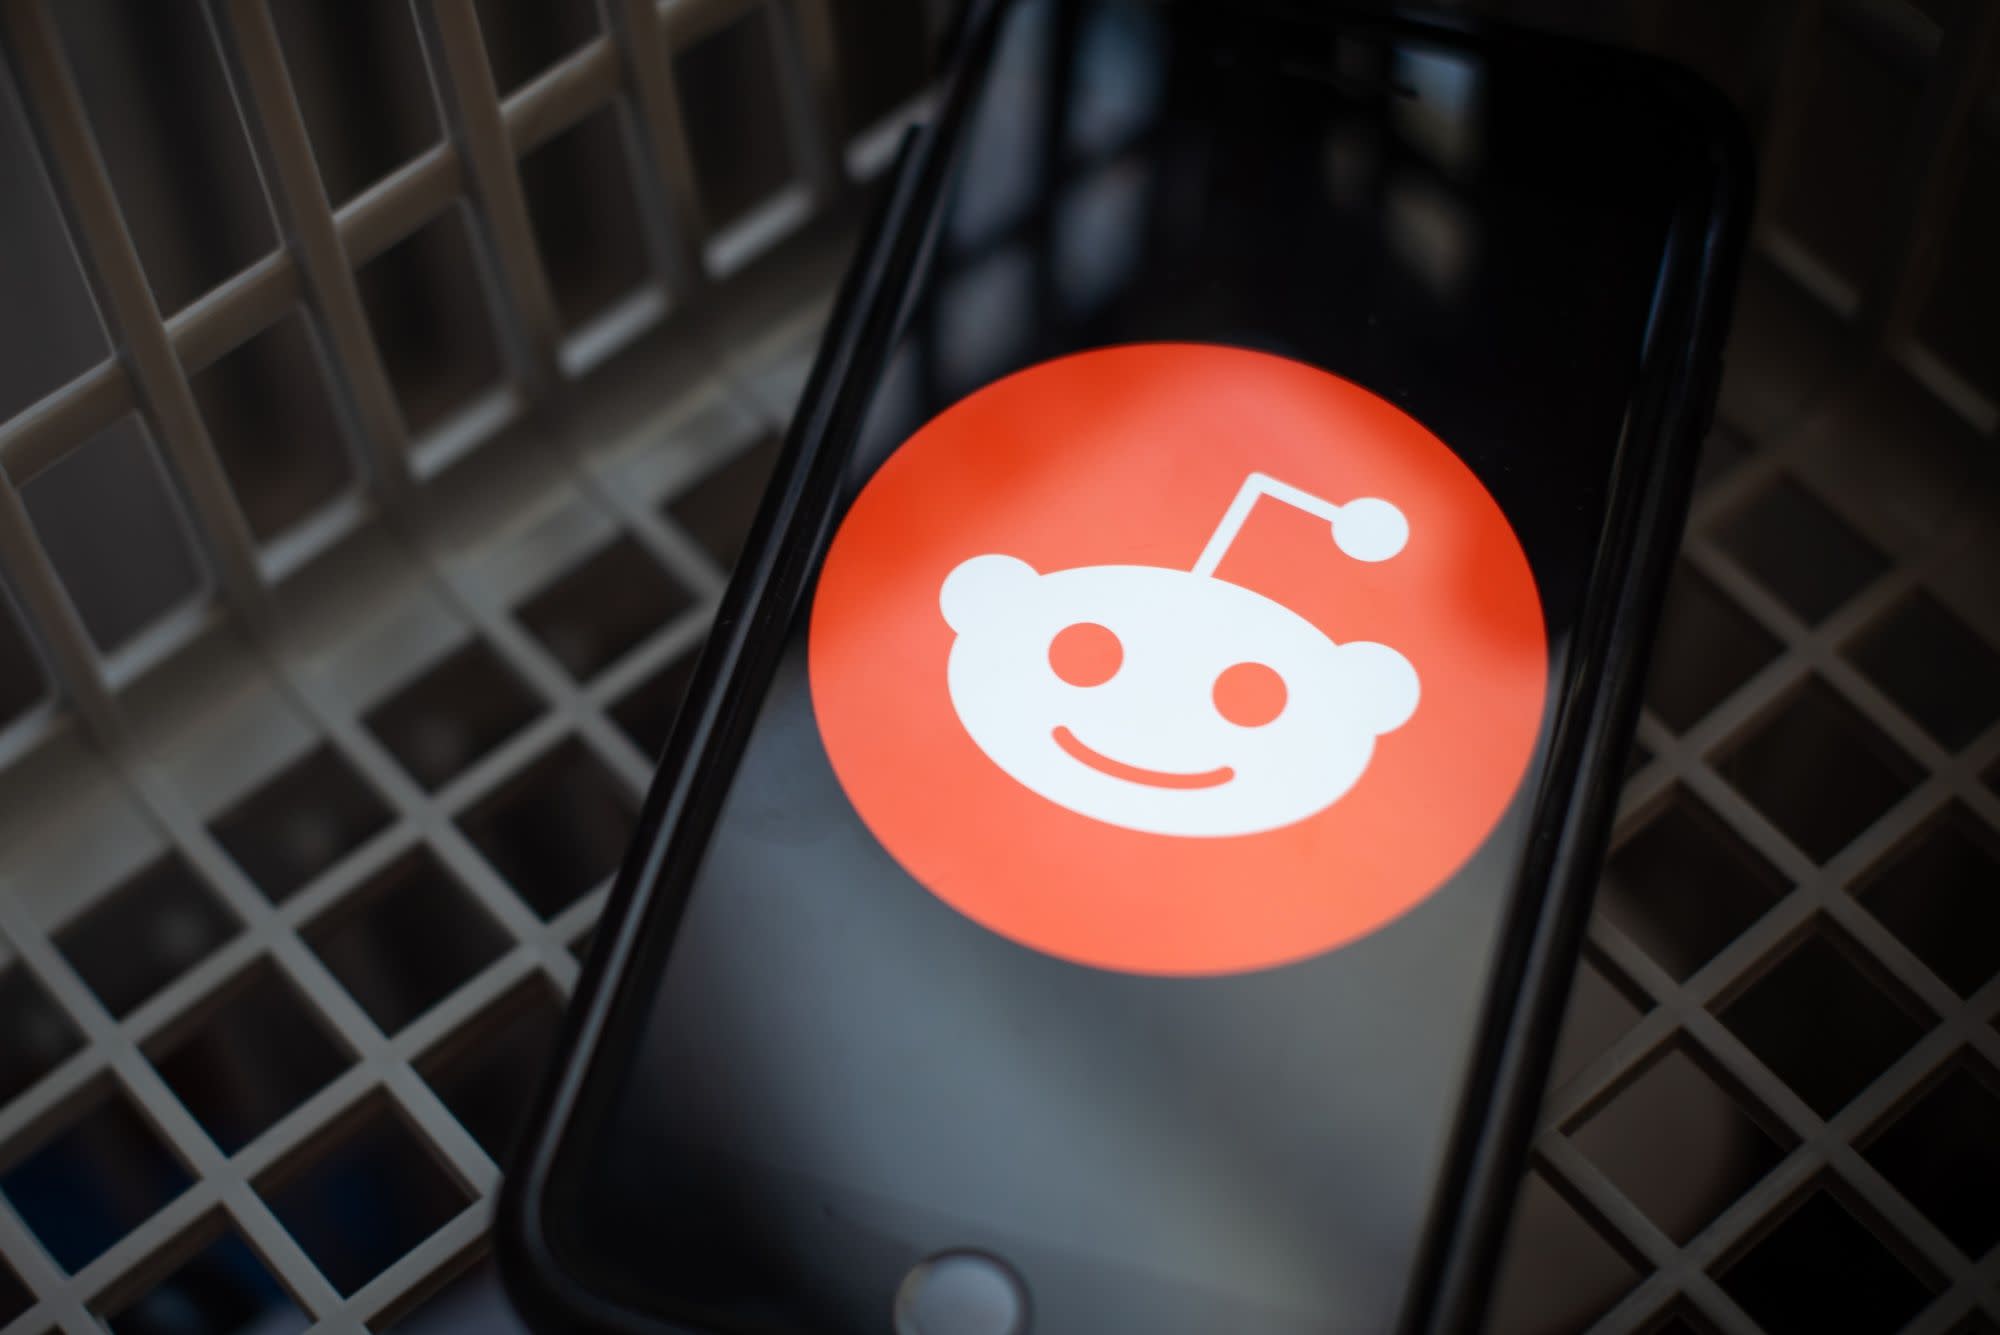 Reddit Value Hits 6 Billion After Users Fueled A Stock Frenzy